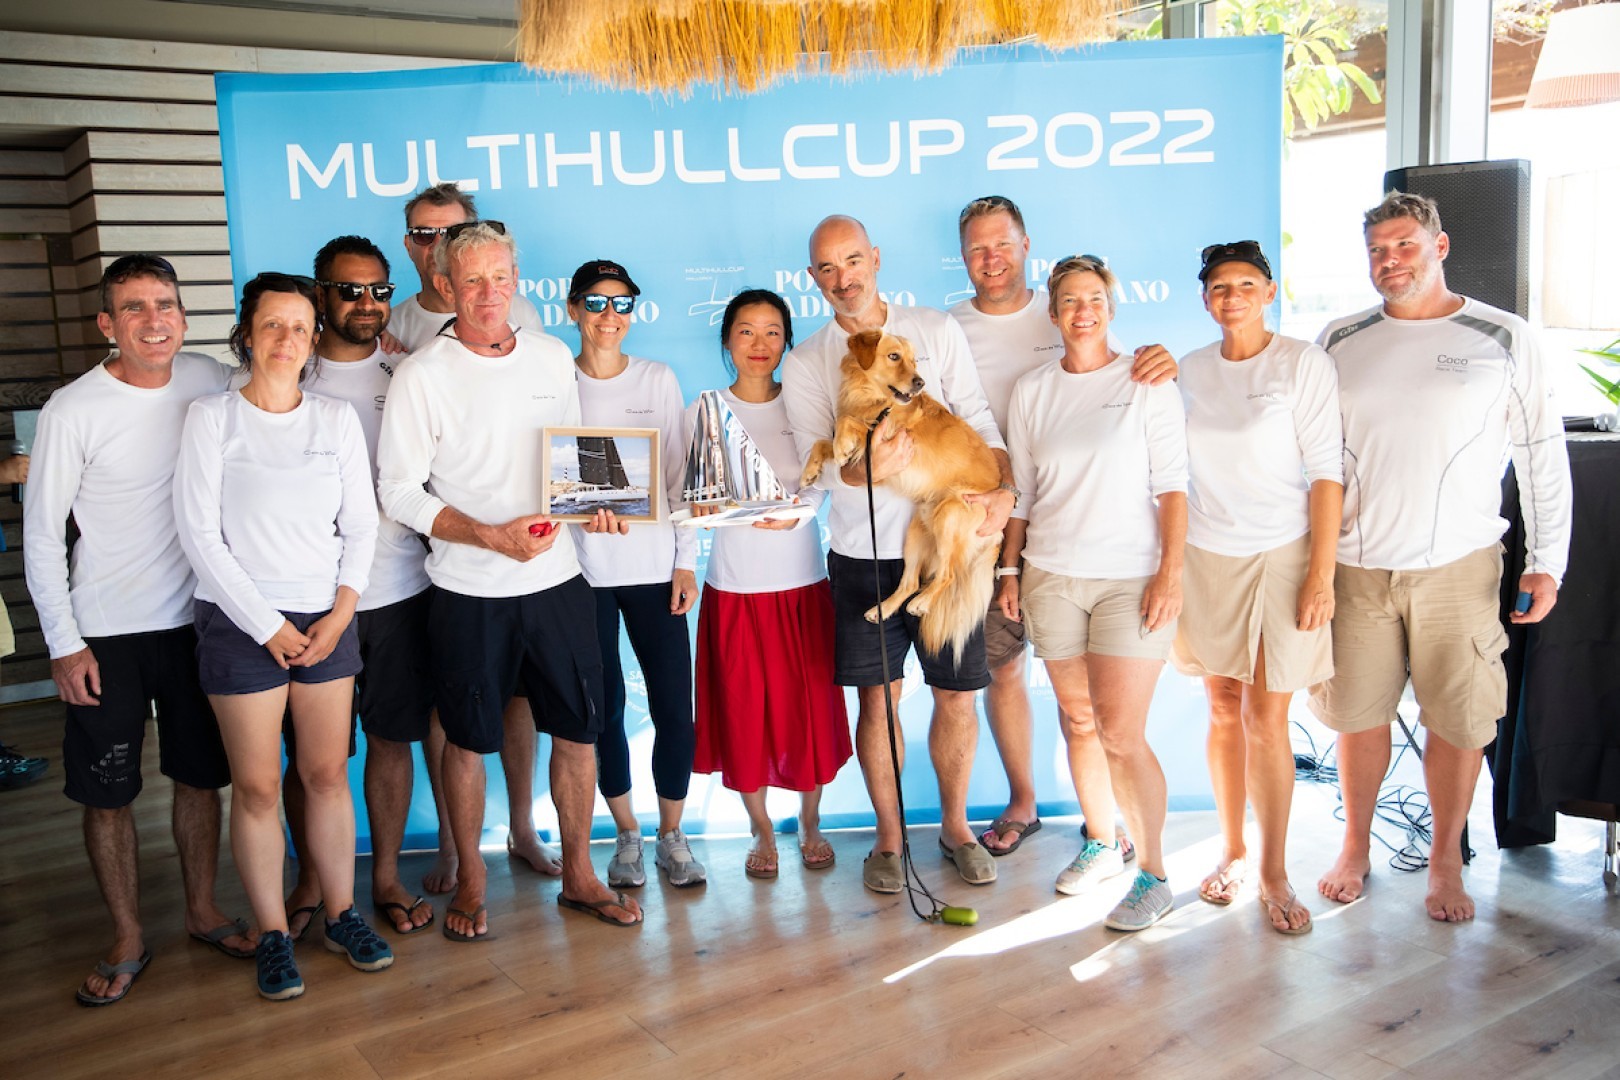 Coco de Mer earns her win at the Multihull Cup